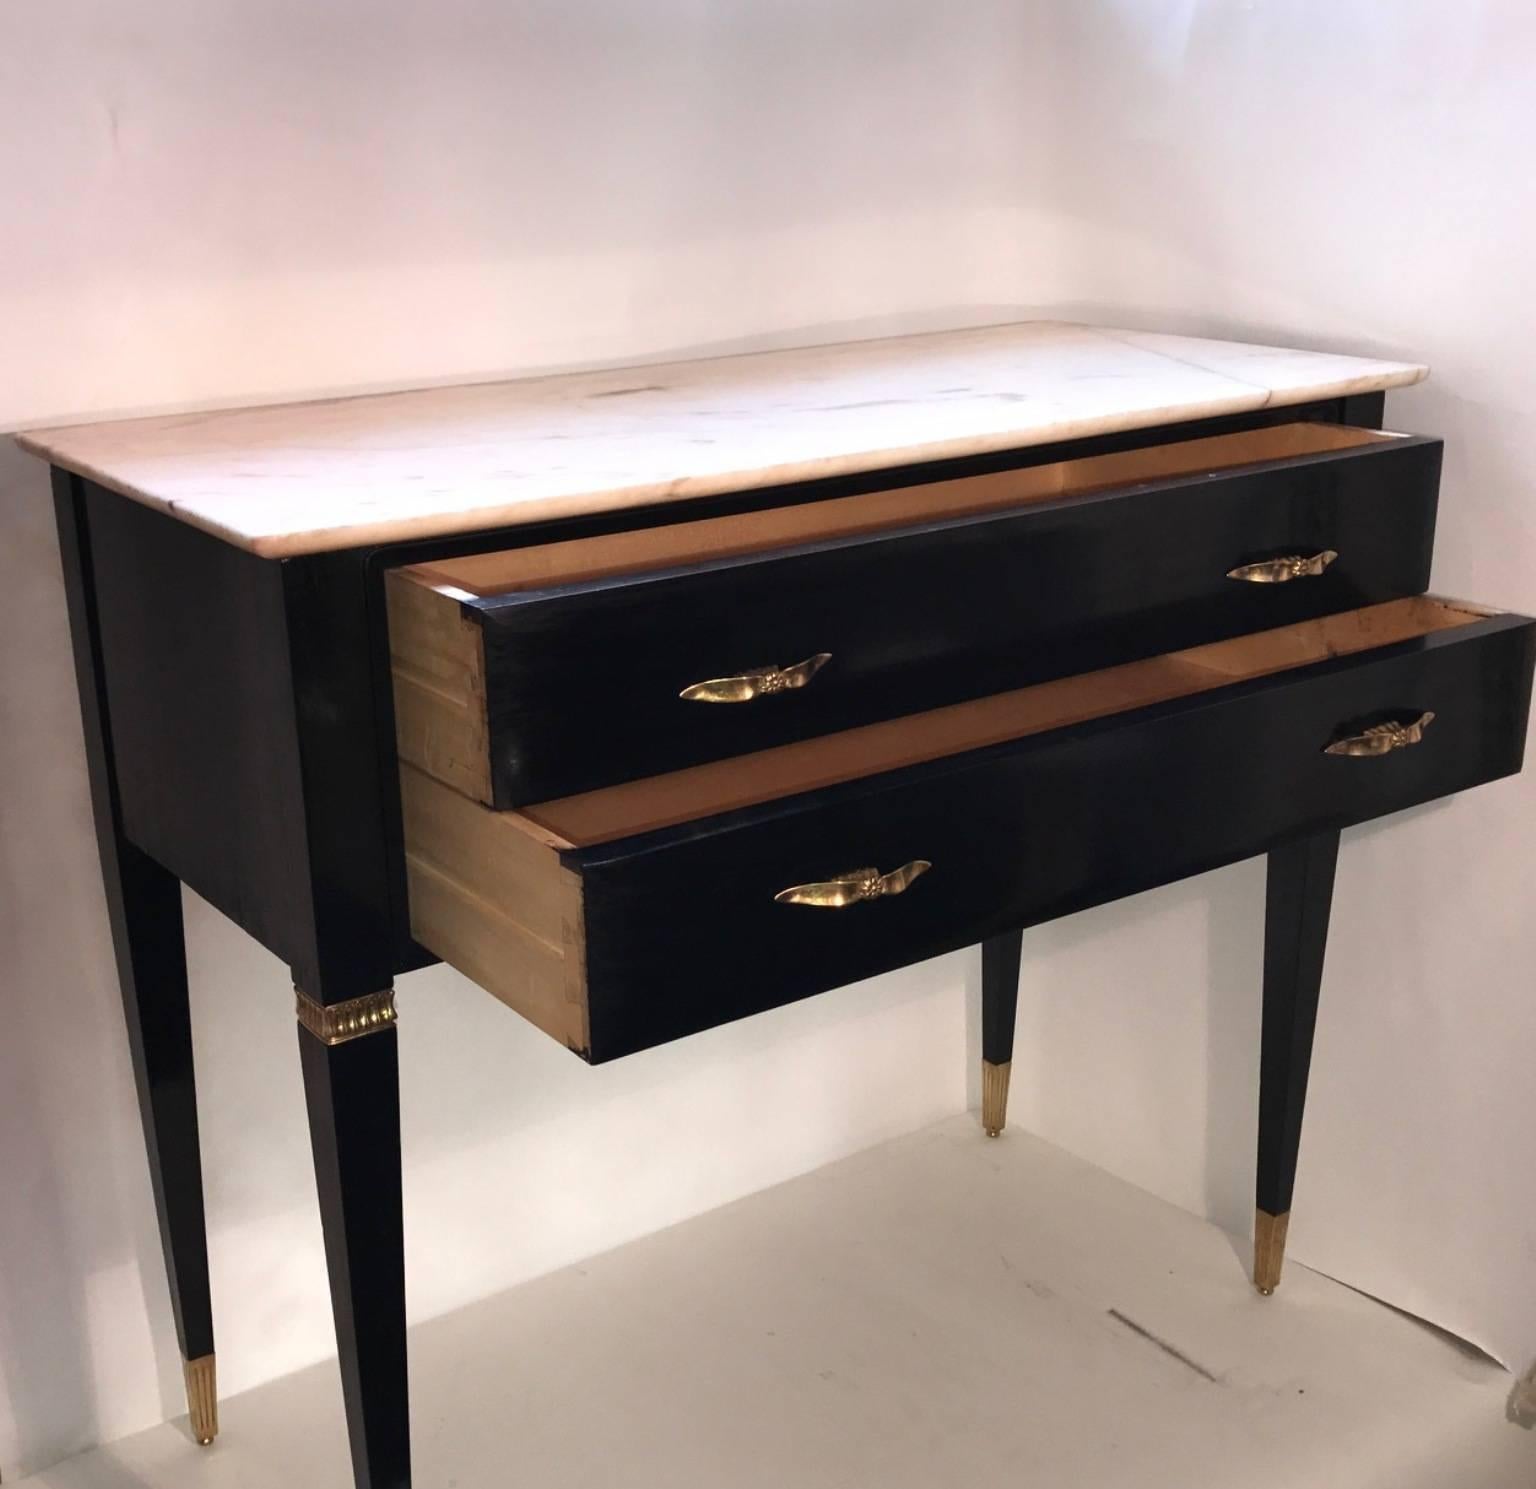 Vintage Italian 1940s elegant design chest of drawers with two drawers, polished black with a marble top, decorative brass handles and brass sabot on the feet. Designed by Paolo Buffa.